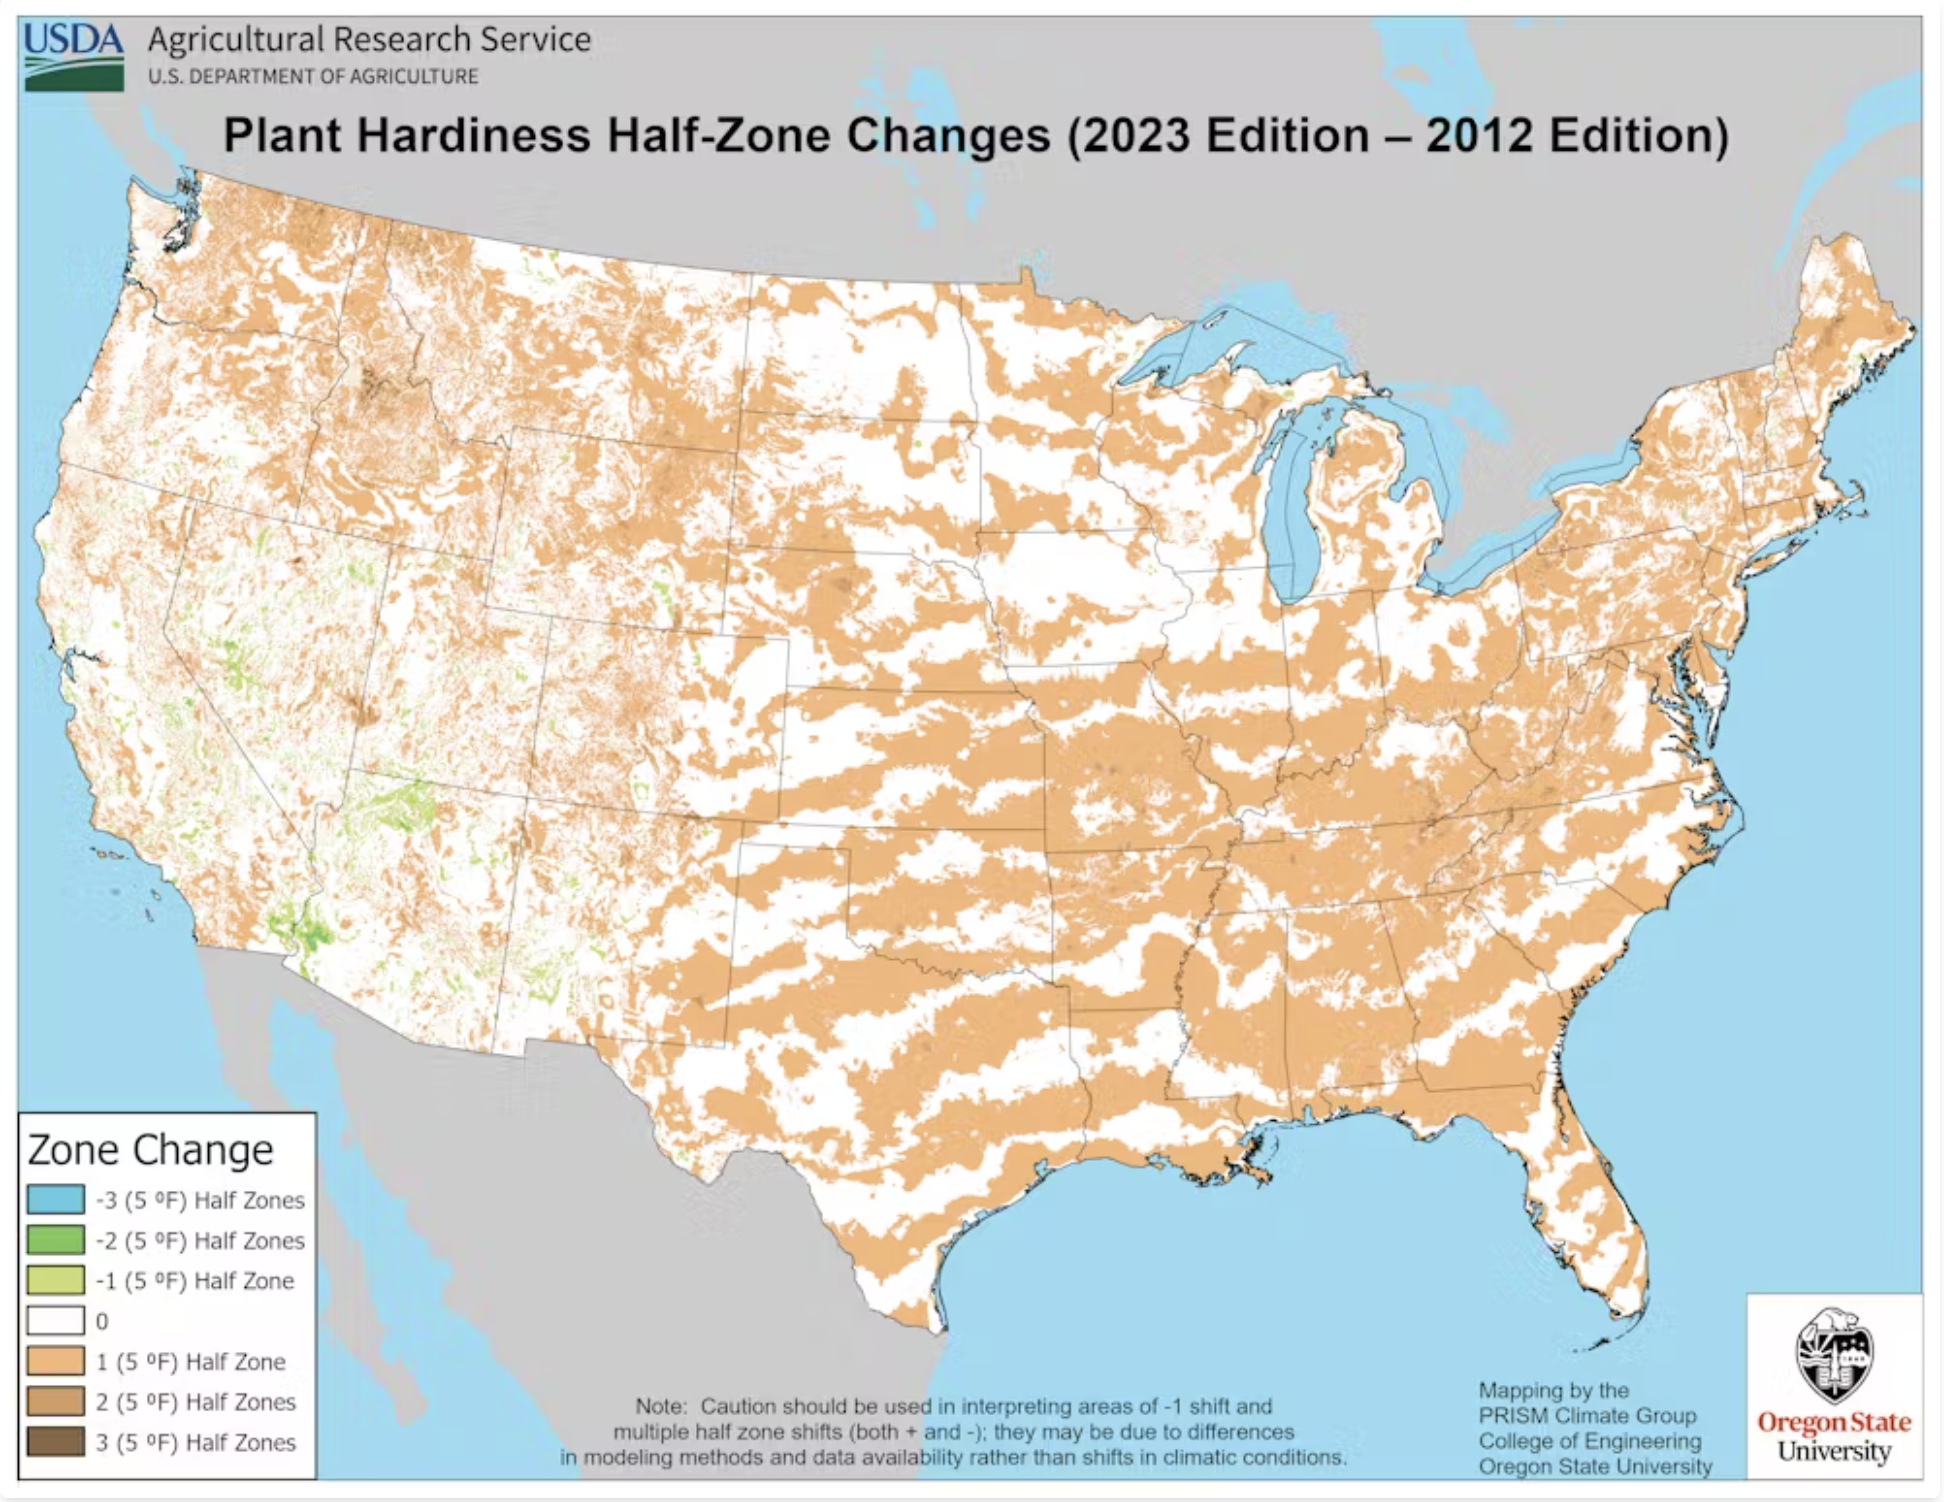 This map shows how plant hardiness zones have shifted northward from the 2012 to the 2023 USDA maps. A half-zone change corresponds to a tan area. Areas in white indicate zones that experienced minimal change. Prism Climate Group, Oregon State University, CC BY-ND